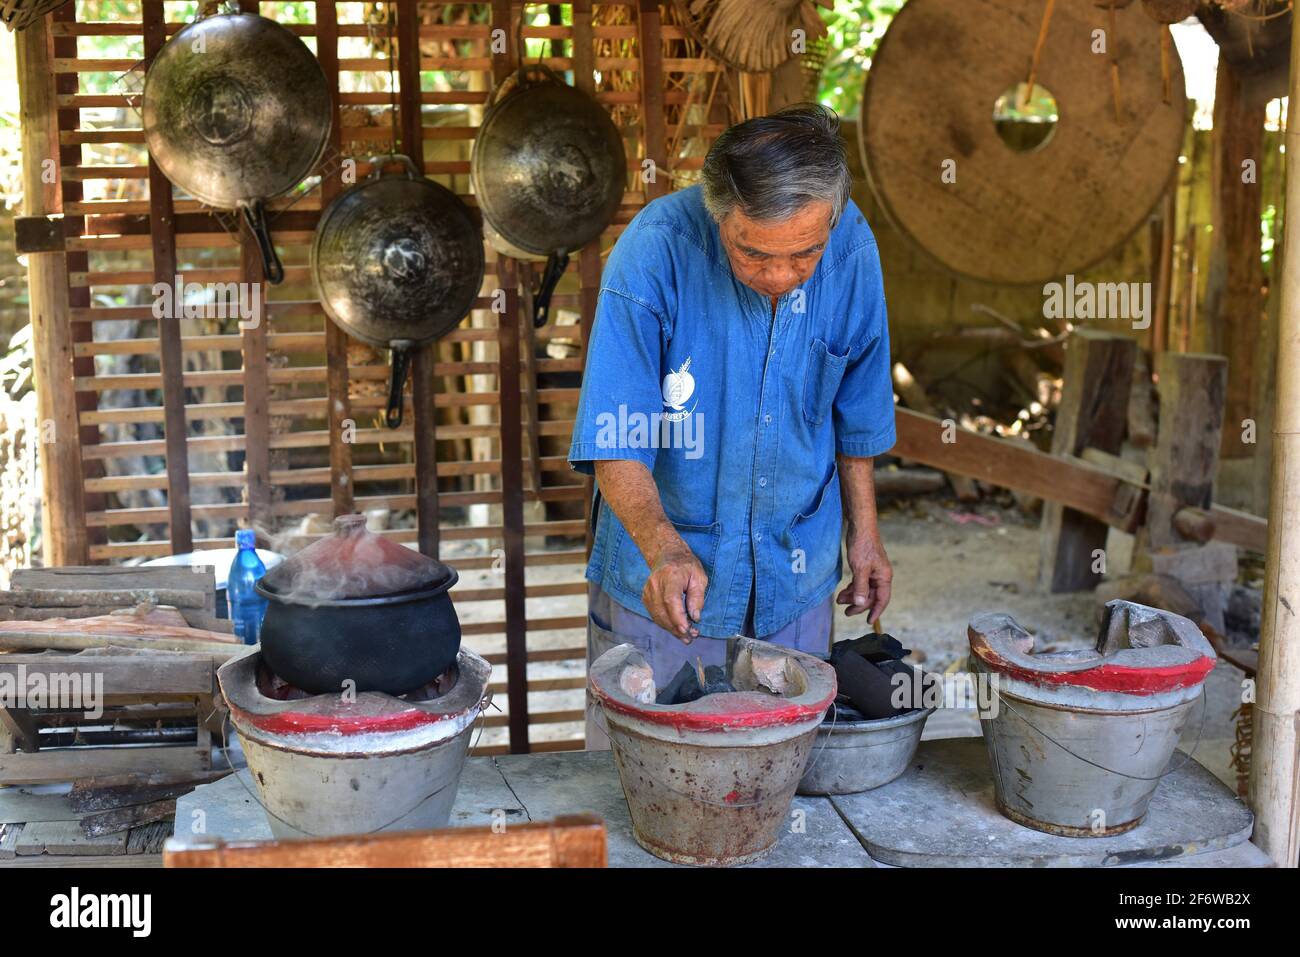 Chiang Mai, man lighting the fire for cook on a traditional house. Thailand. Stock Photo